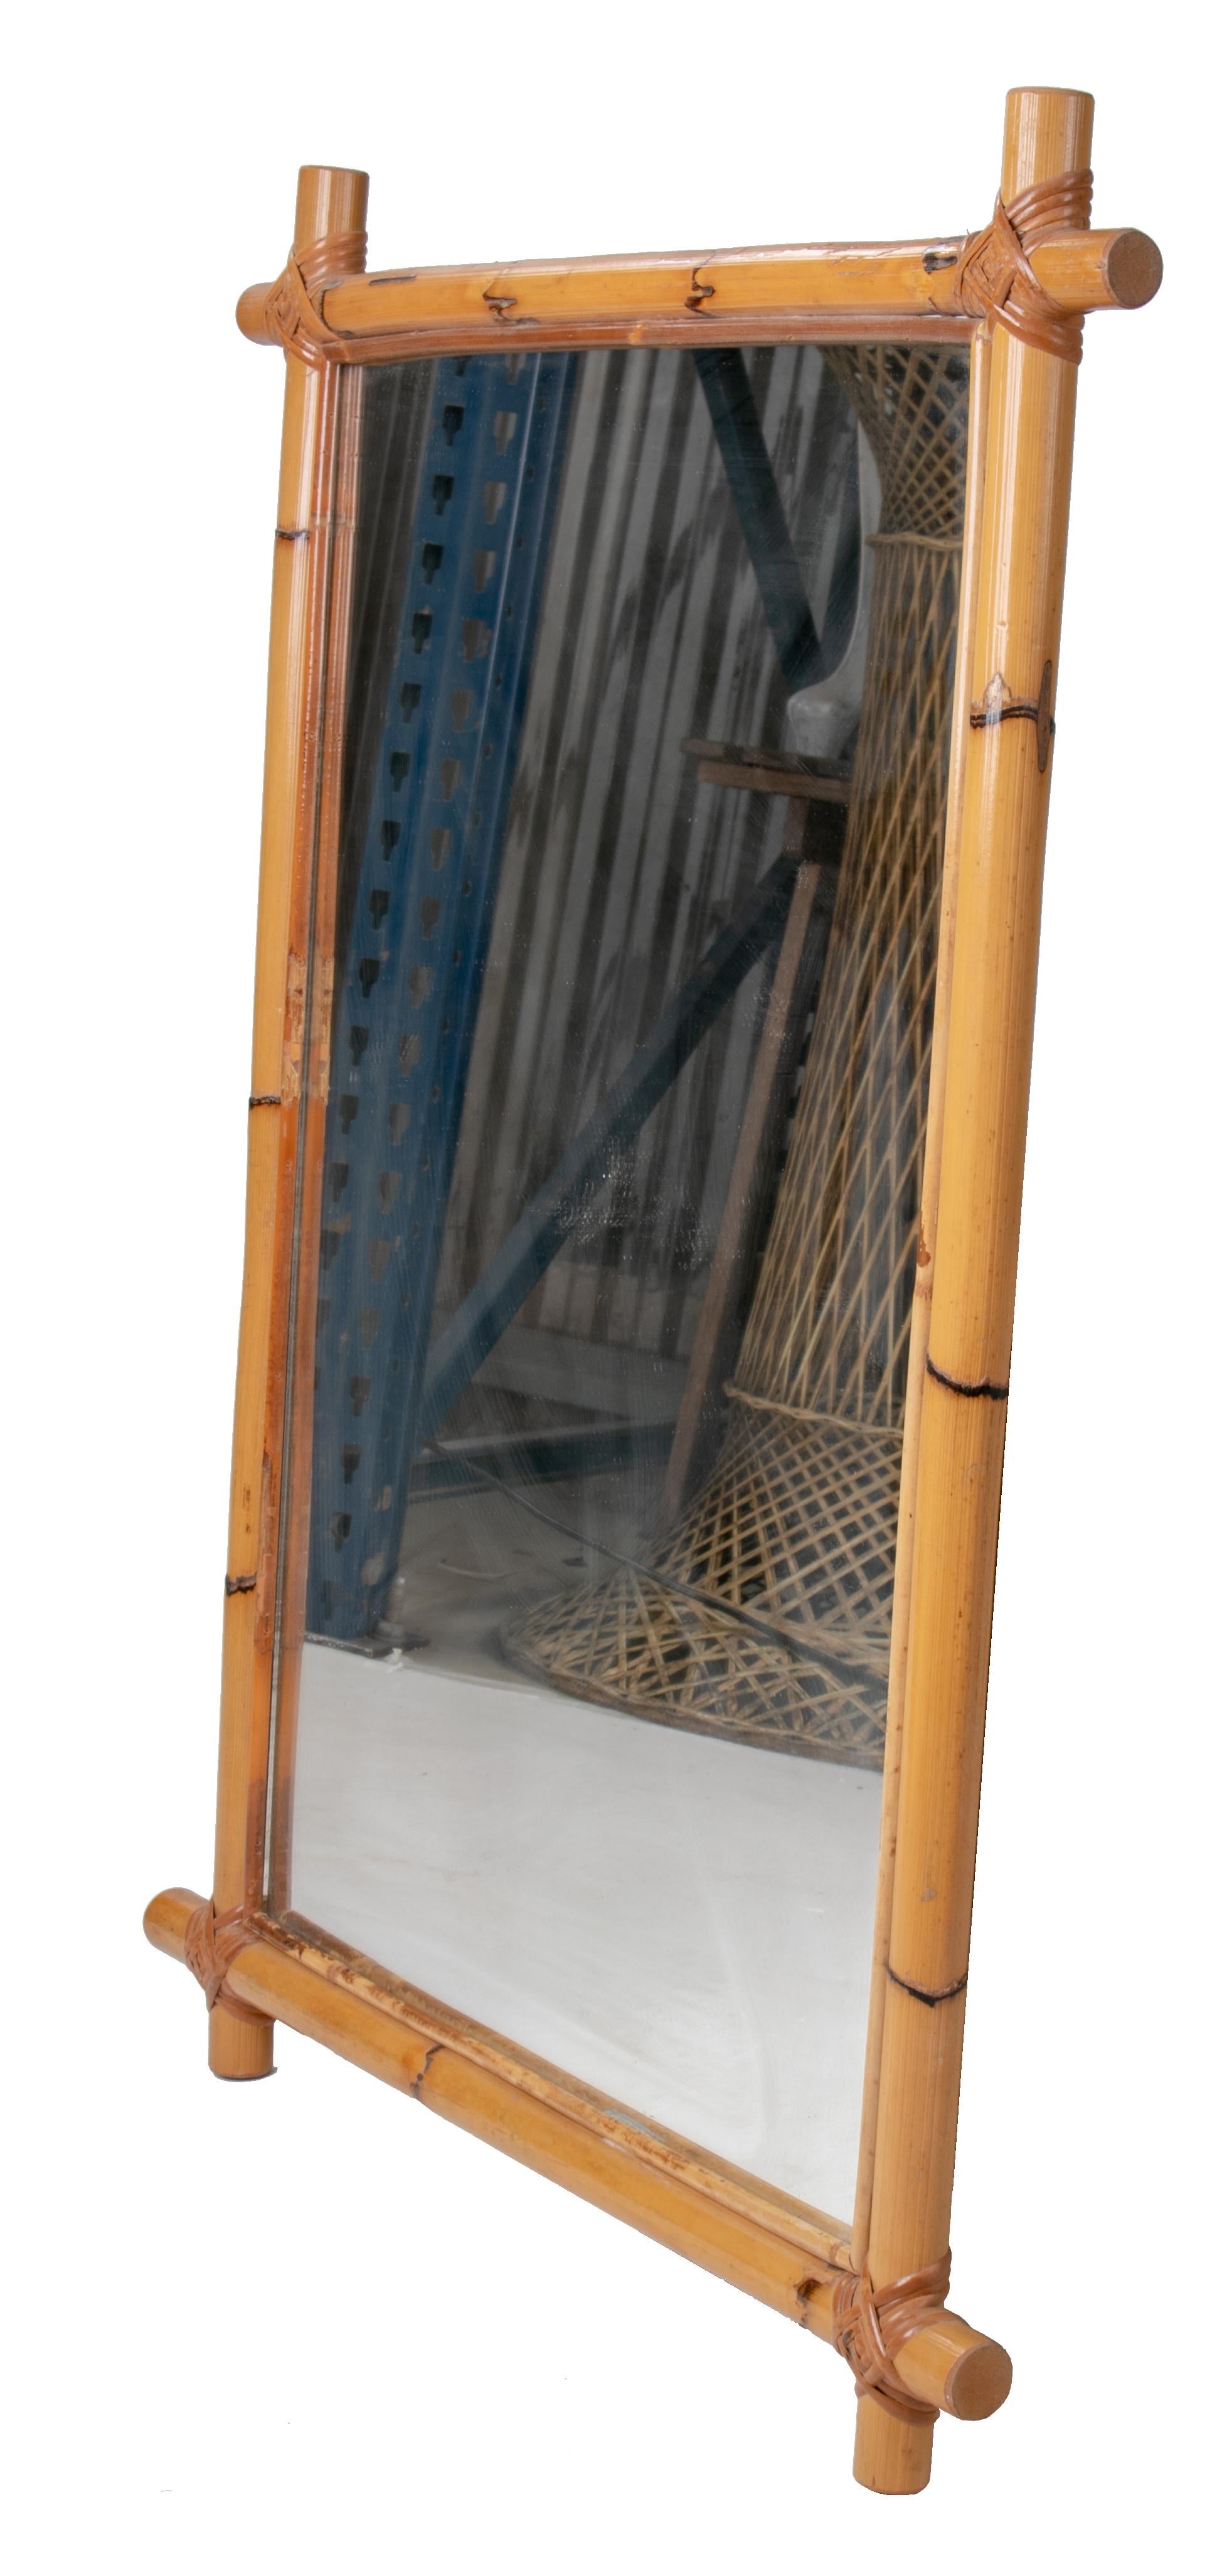 1970s Spanish bamboo and wicker framed mirror.